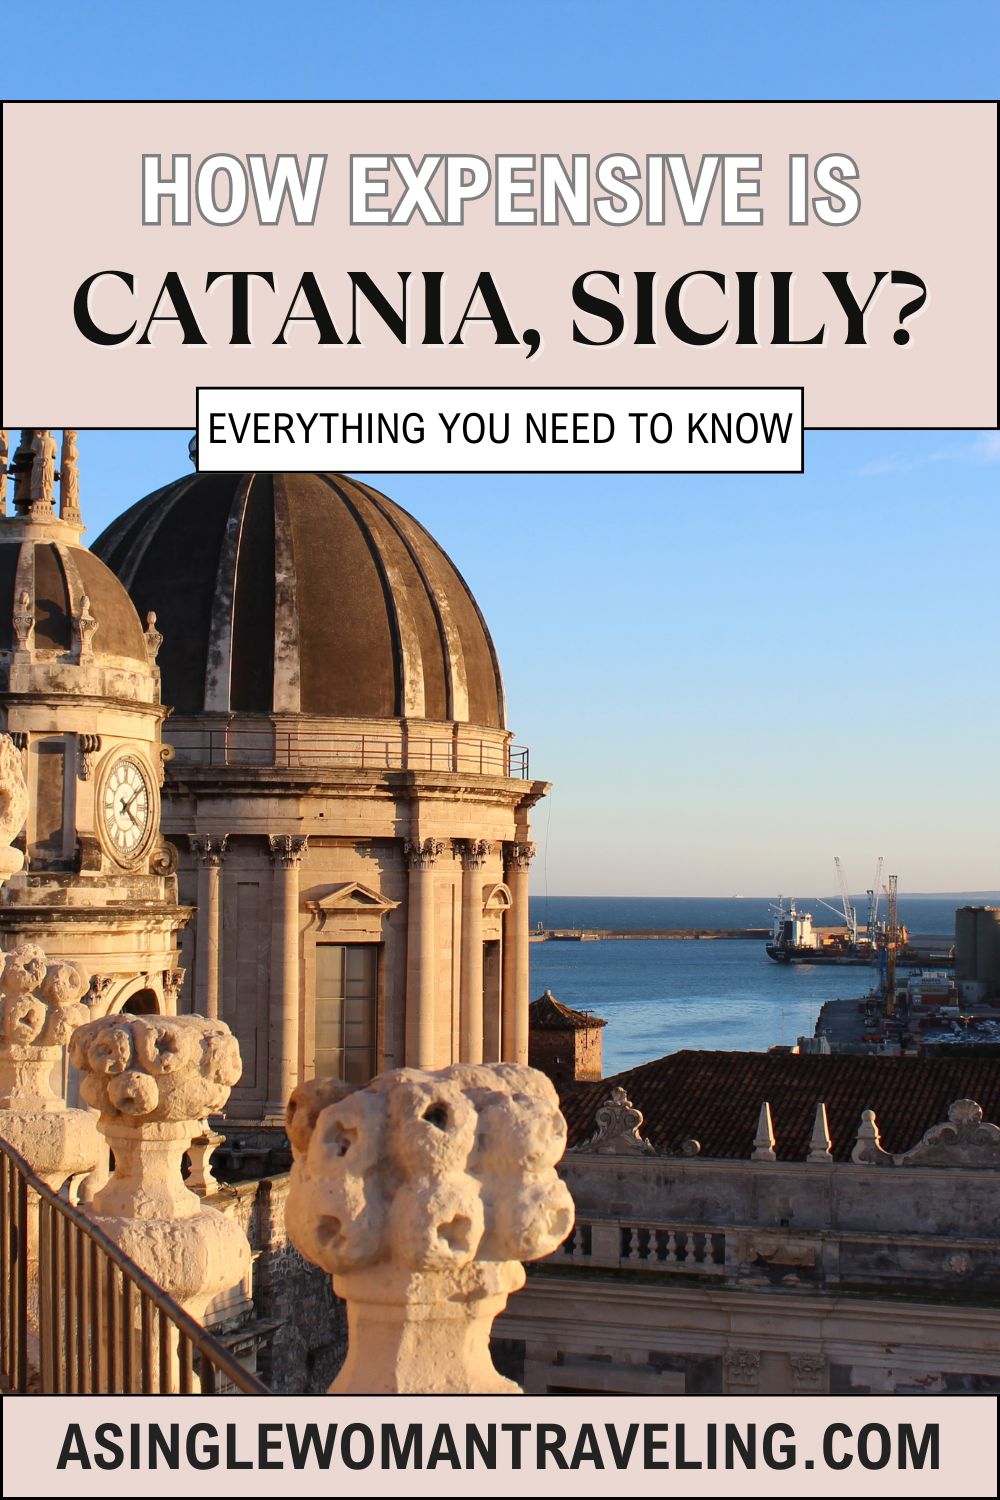 A view of the dome of Catania Cathedral with the sea in the background, accompanied by the text 'How expensive is Catania, Sicily? Everything you need to know' and the URL 'asinglewomantraveling.com' at the bottom."